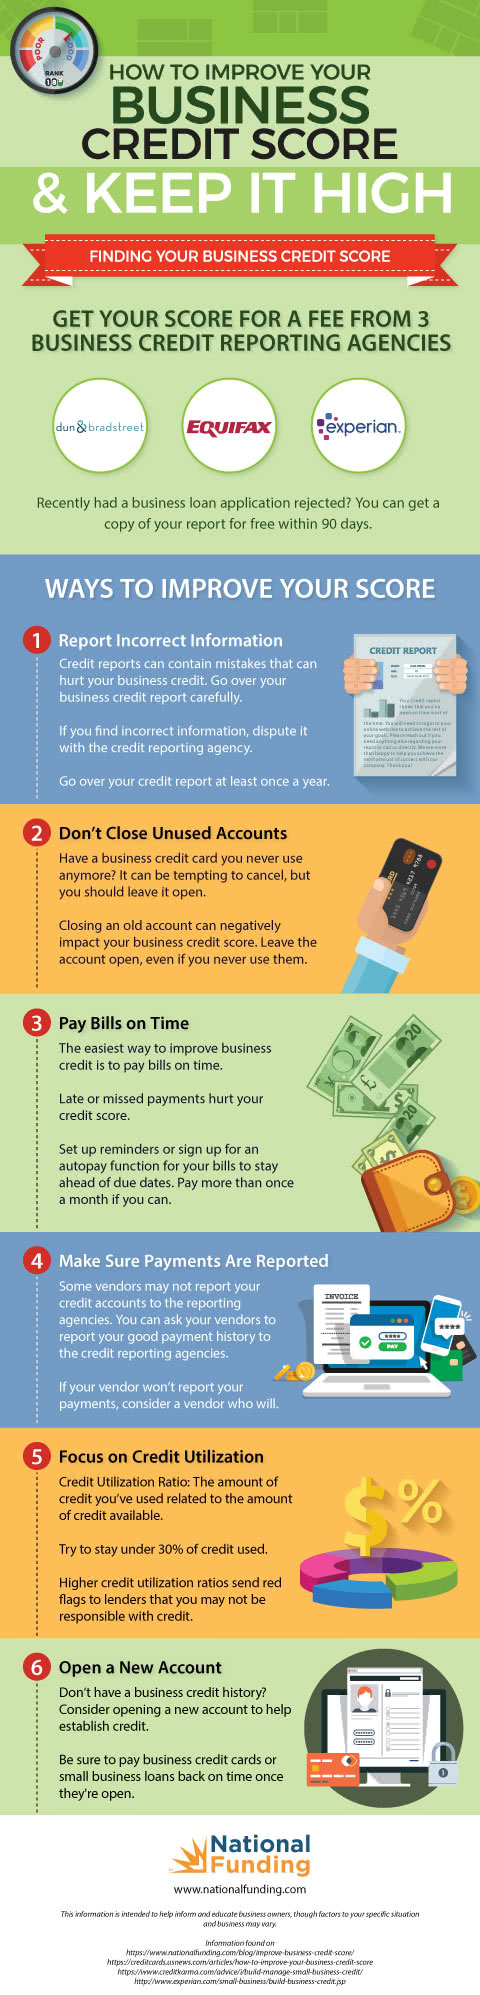 How To Improve Business Credit Score?